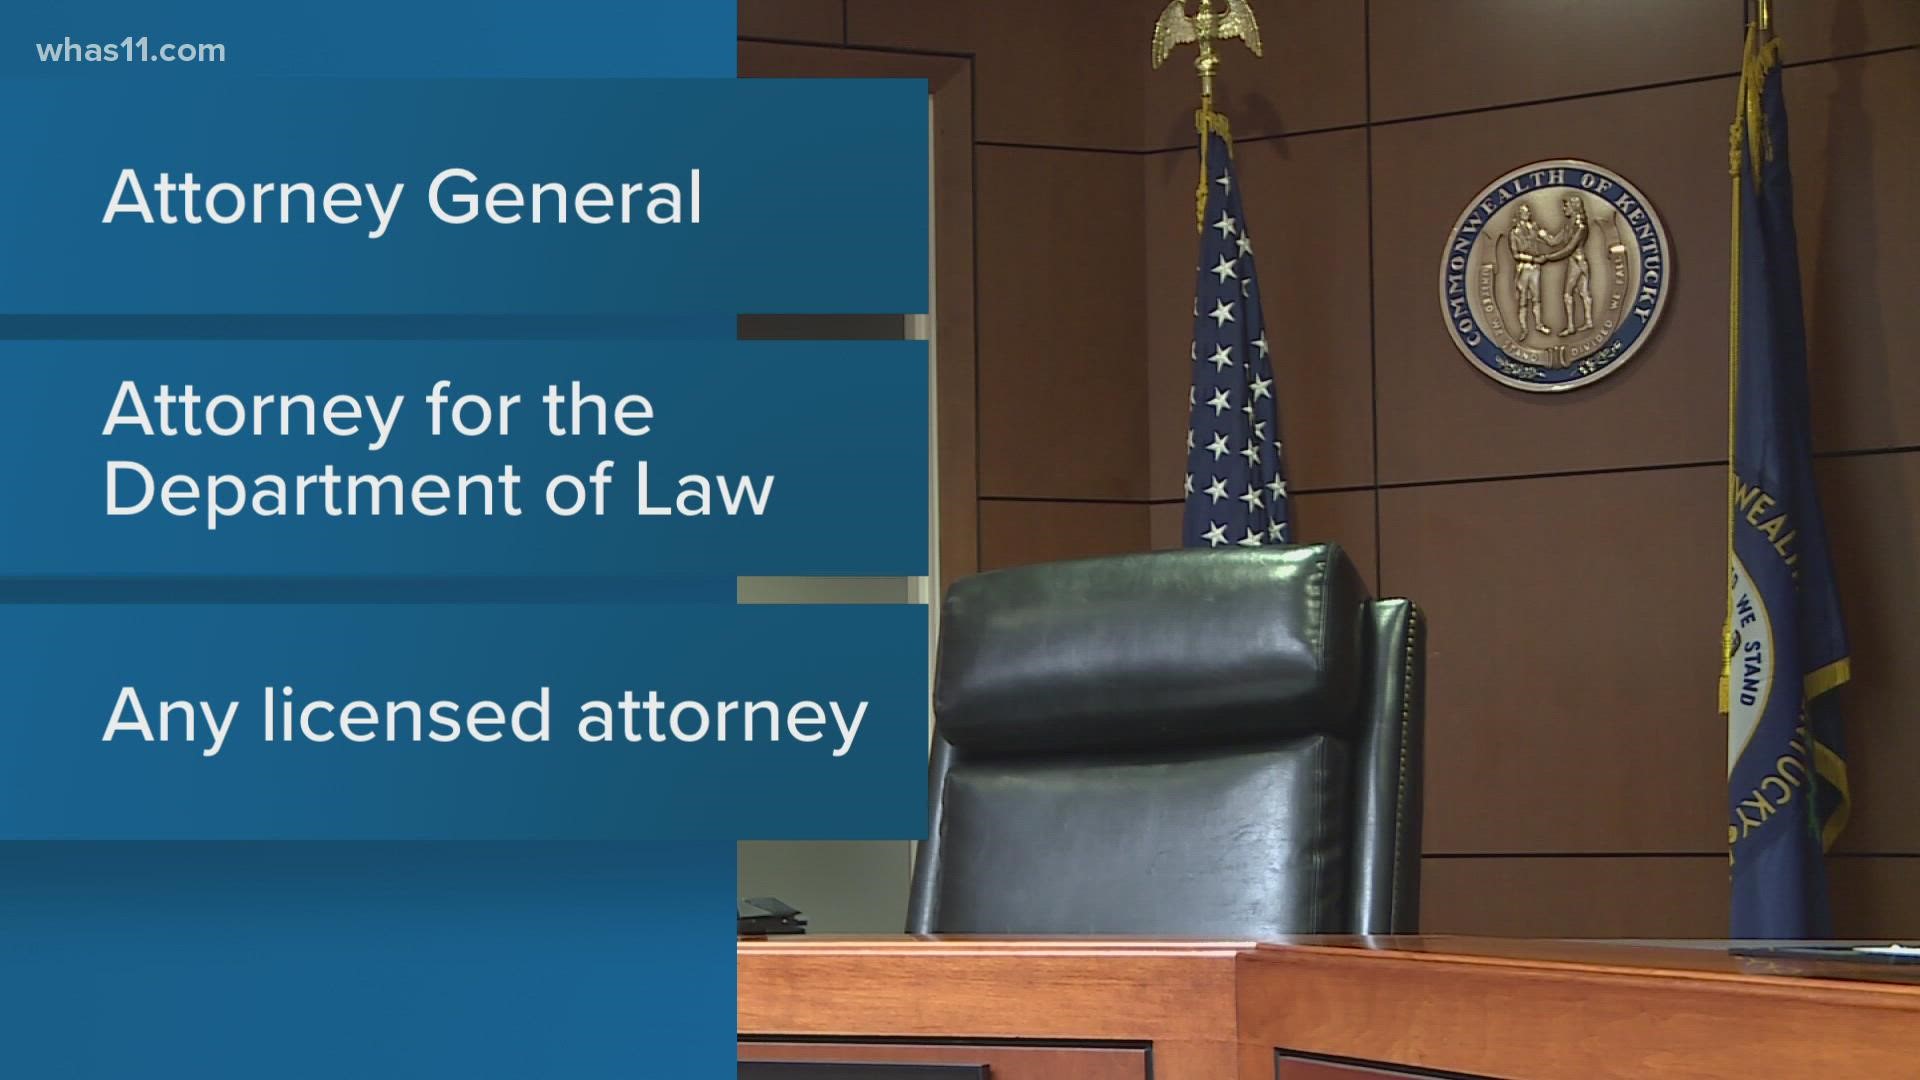 It would allow the attorney general, an attorney employed by the department of law and any state licensed attorney to carry a concealed weapon into the courtroom.